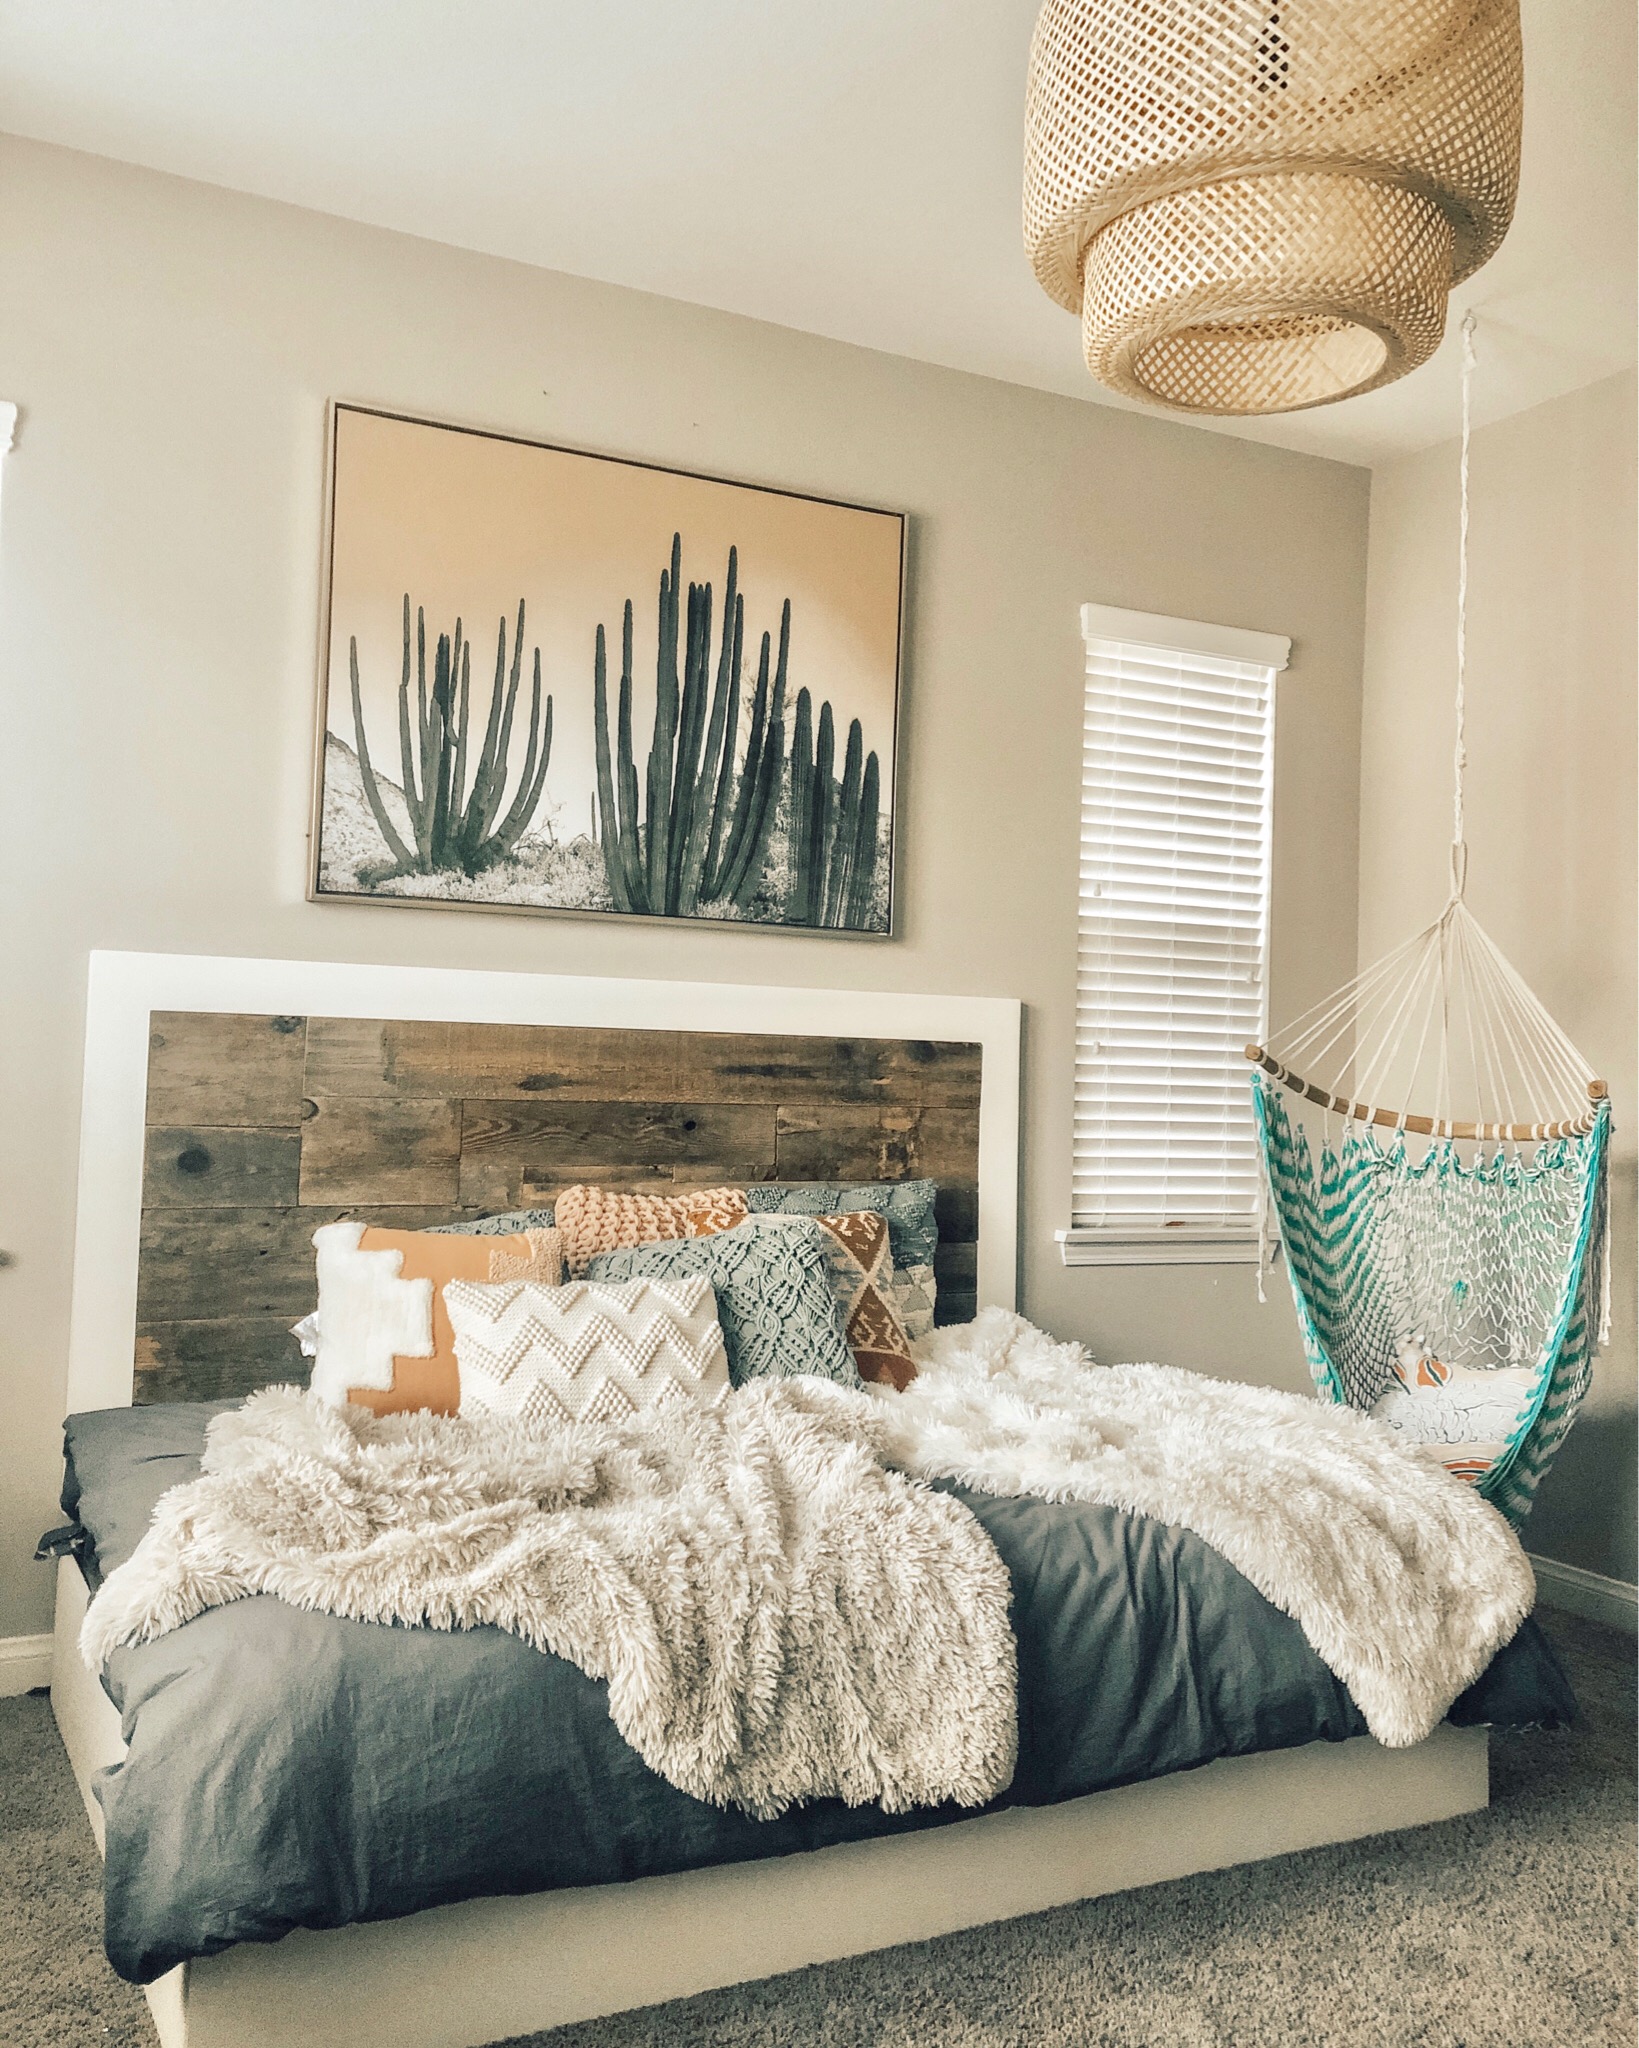 UPDATING OUR GUEST ROOM + CURRENT HOME FINDS- Jaclyn De Leon Style + home interior inspo + bohemian style decor + guest bedroom + world market + target style + home finds under $50 + home design inspiration